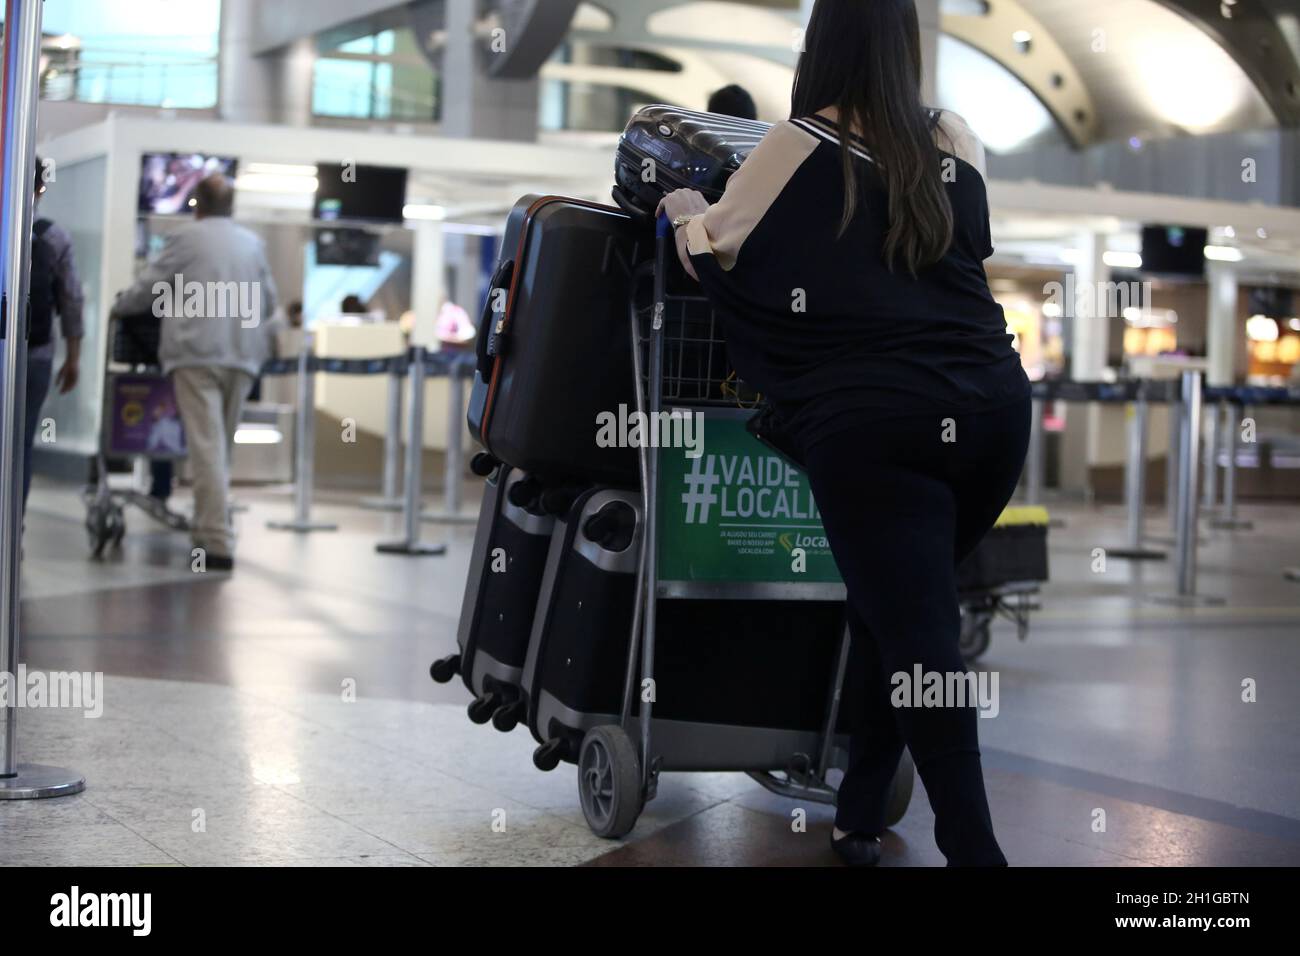 salvador, bahia / brazil - september 22, 2017: passengers are seen poking cart with suitcase in the lobby of the airport of the city of Salvador. *** Stock Photo